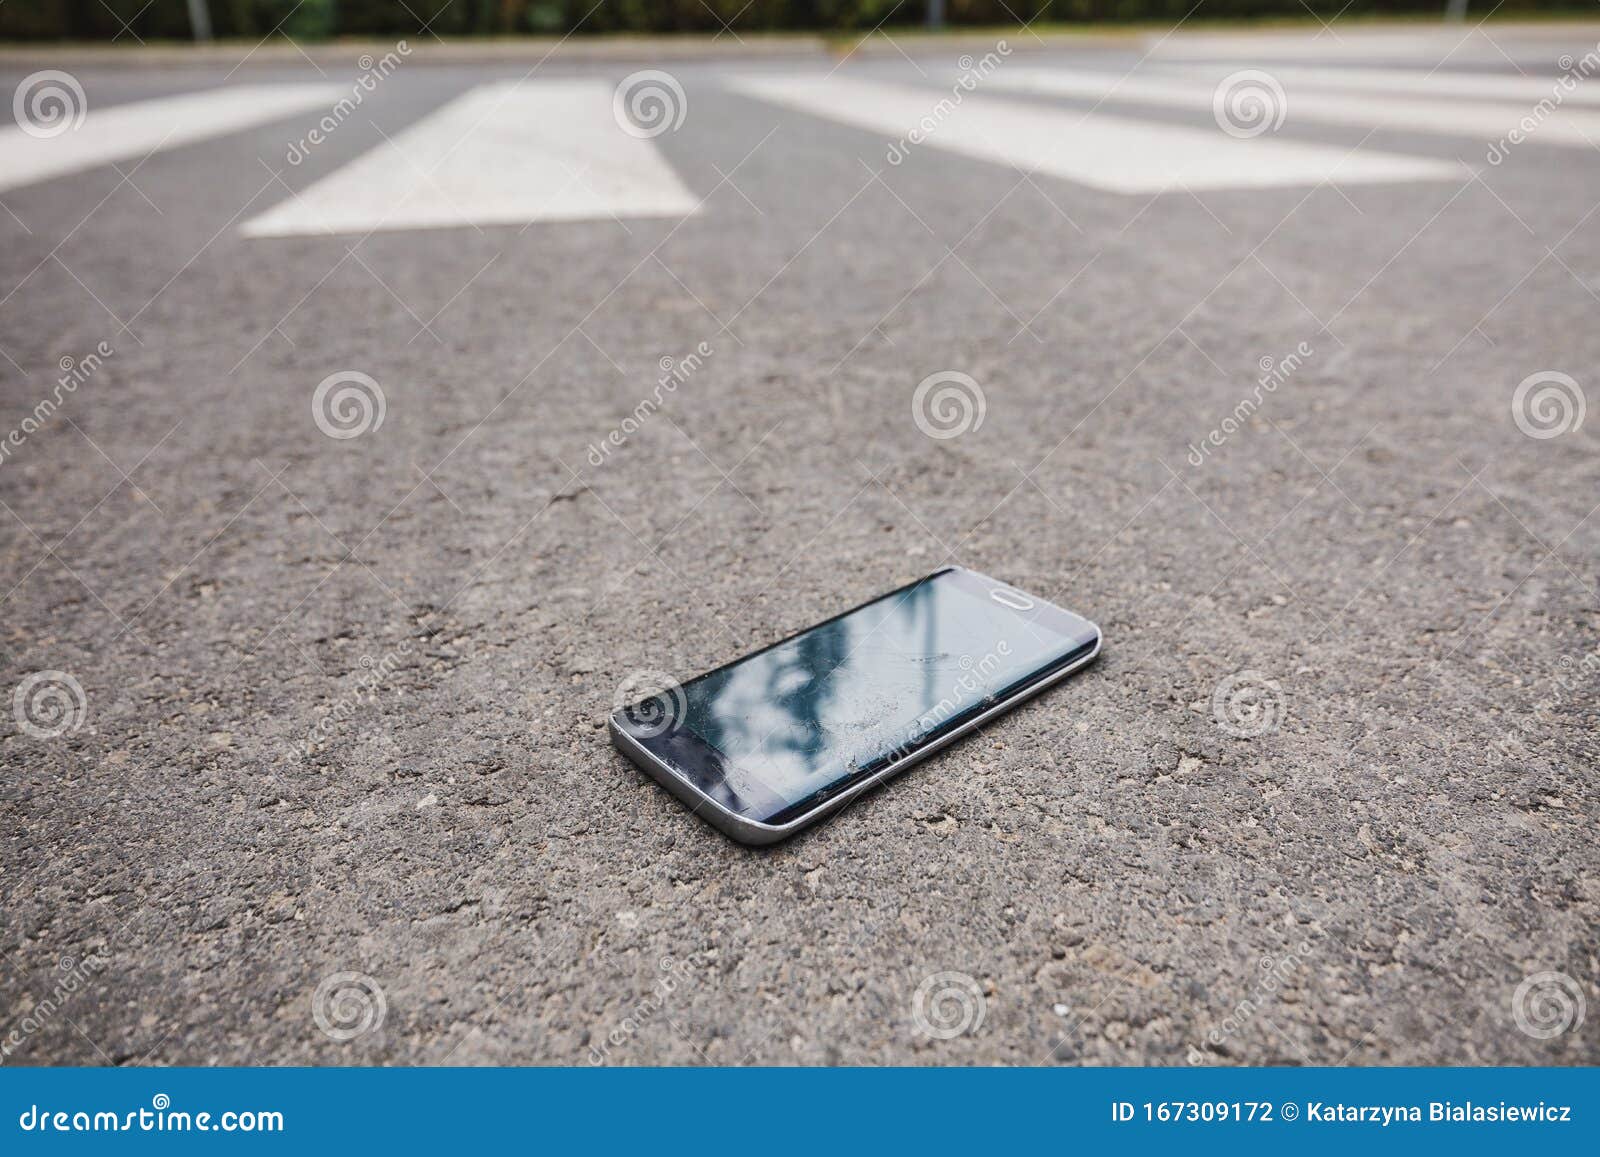 Lost cell phone stock photo. Image of crosswalk, smartphone - 167309172